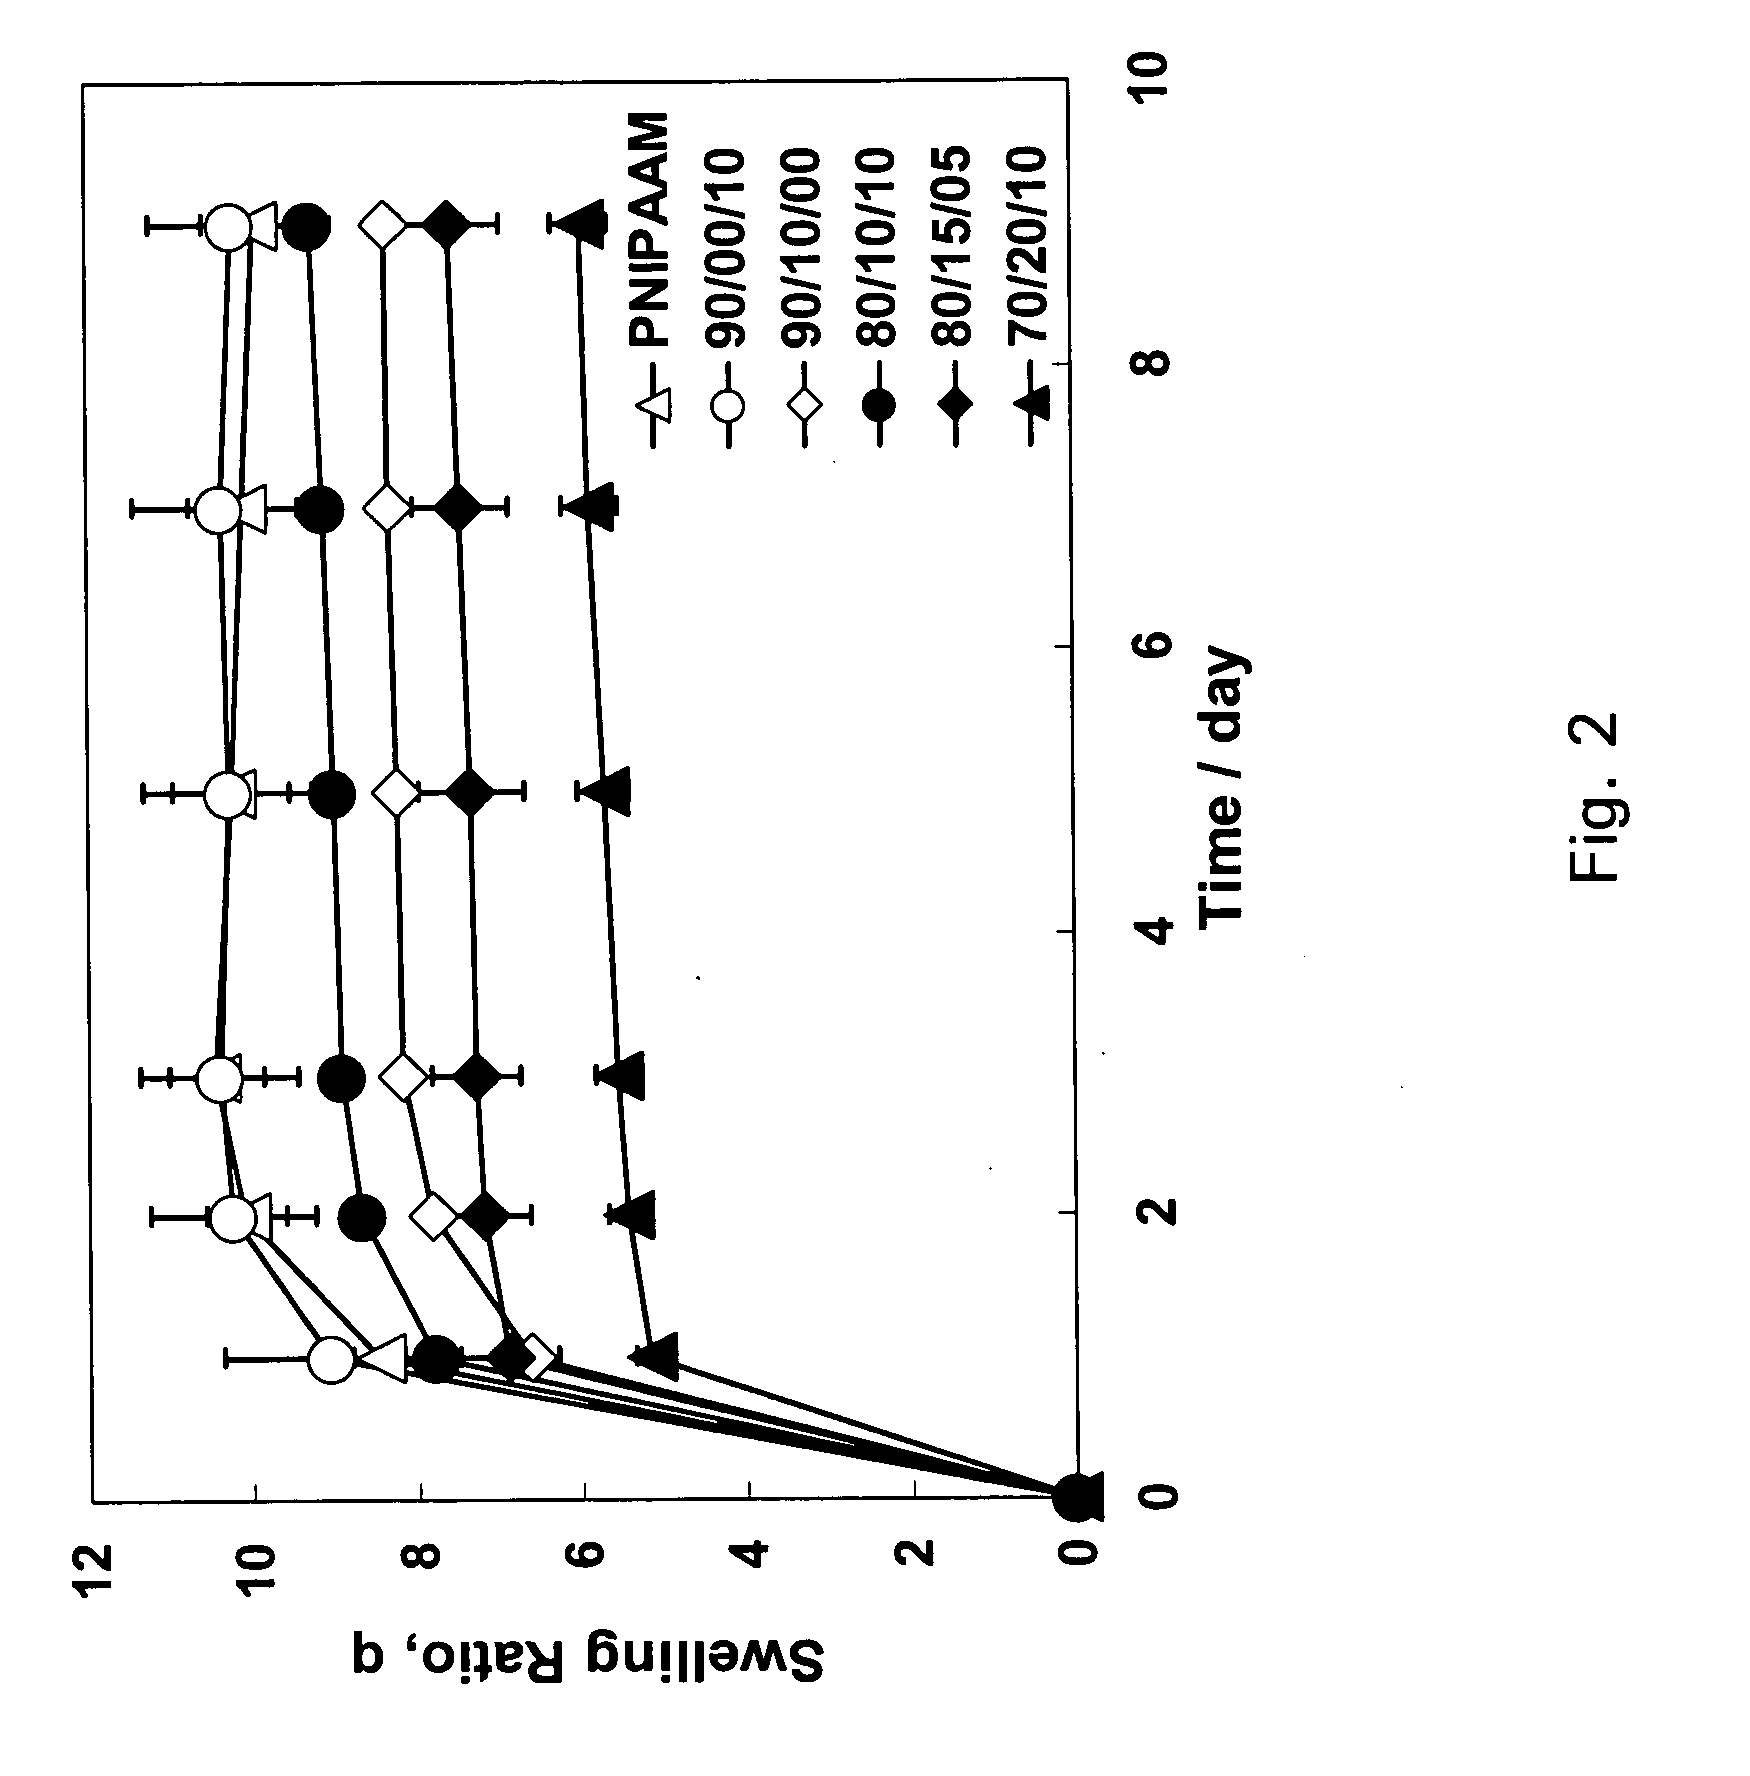 Multi-functional polymeric materials and their uses